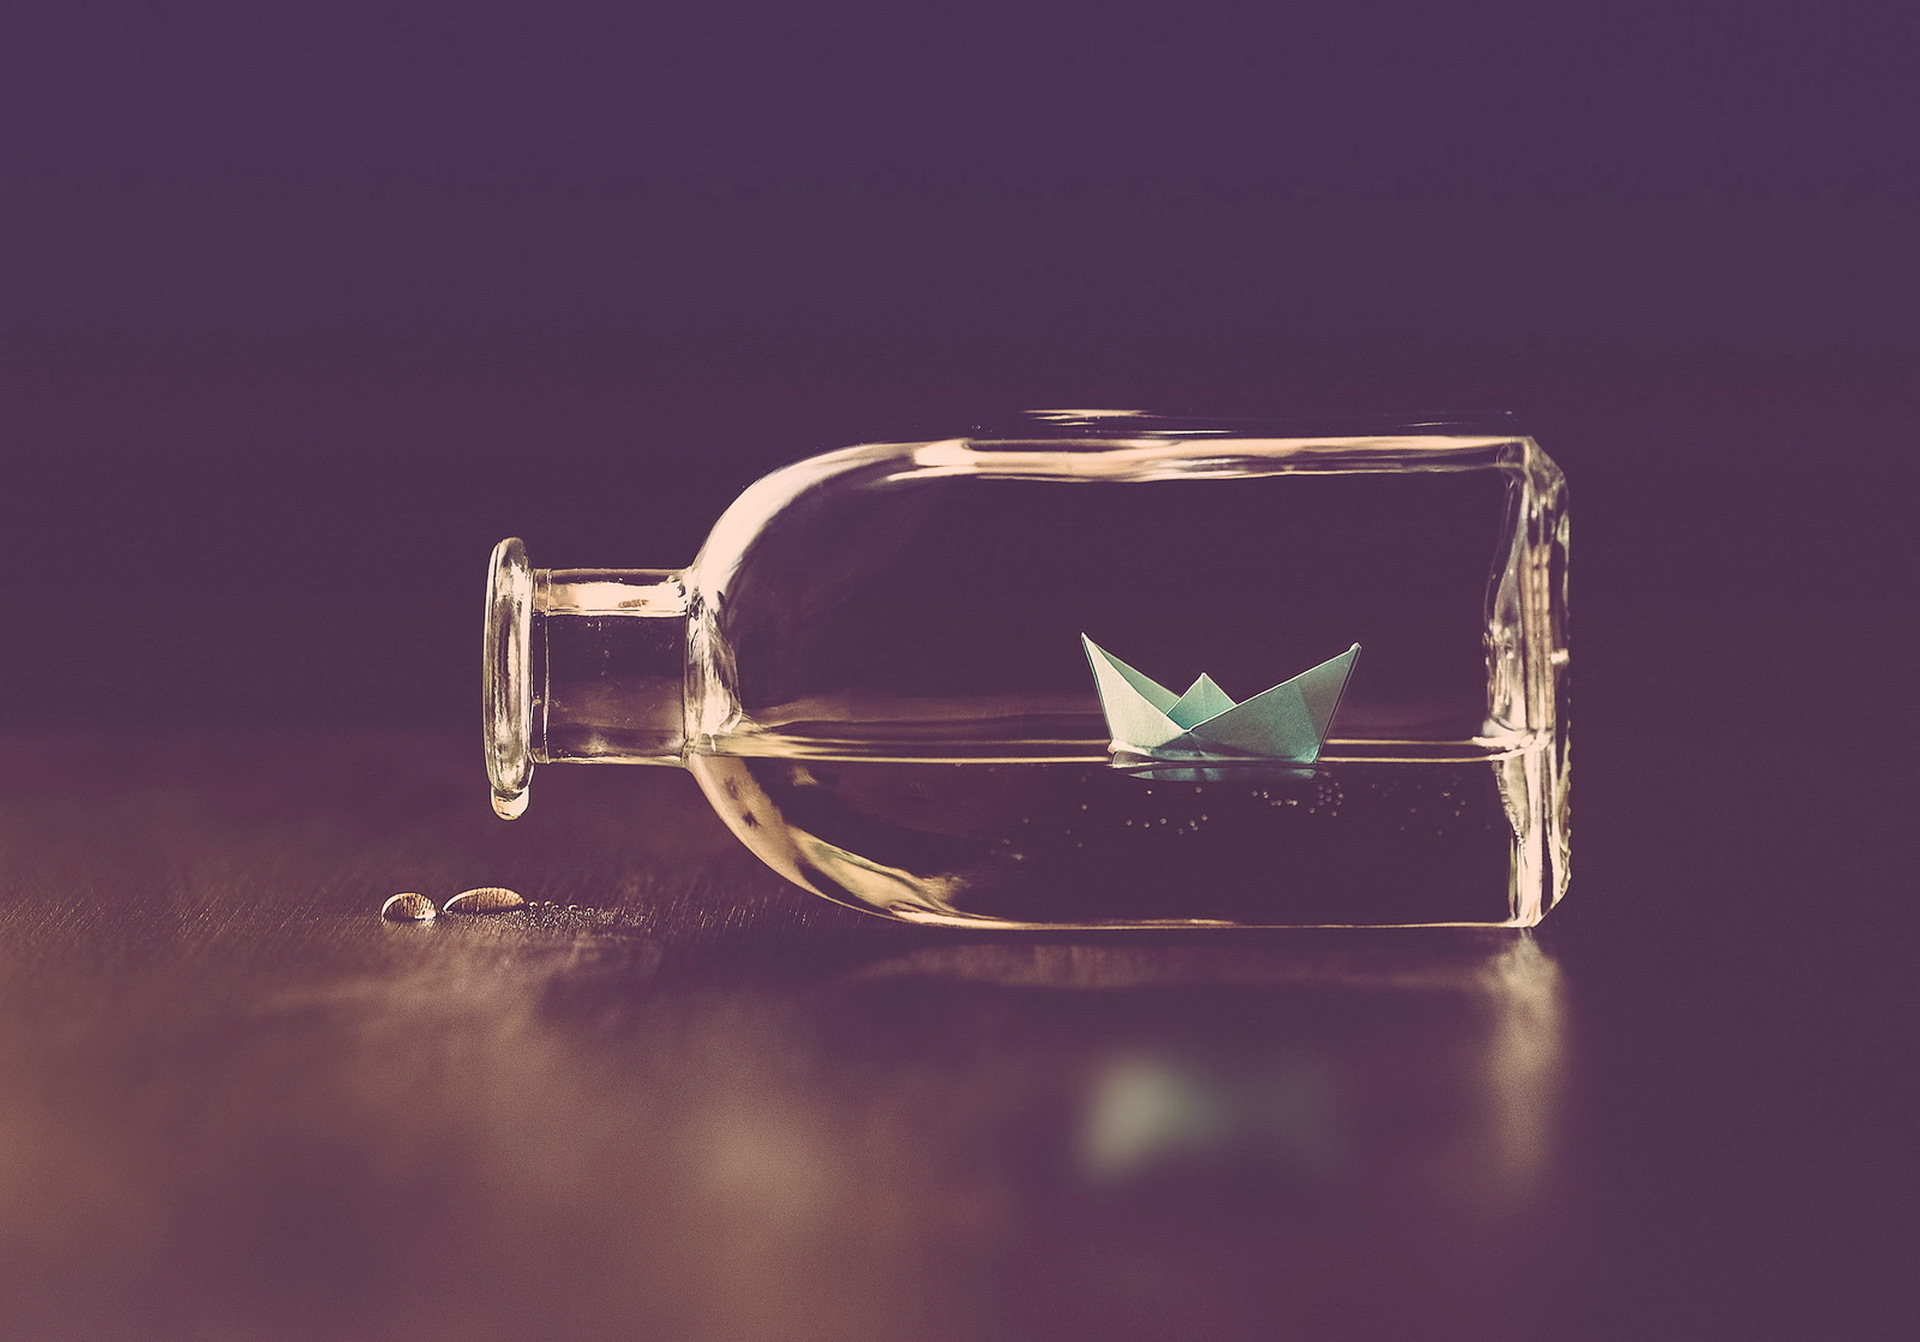 Ship In A Bottle Wallpapers